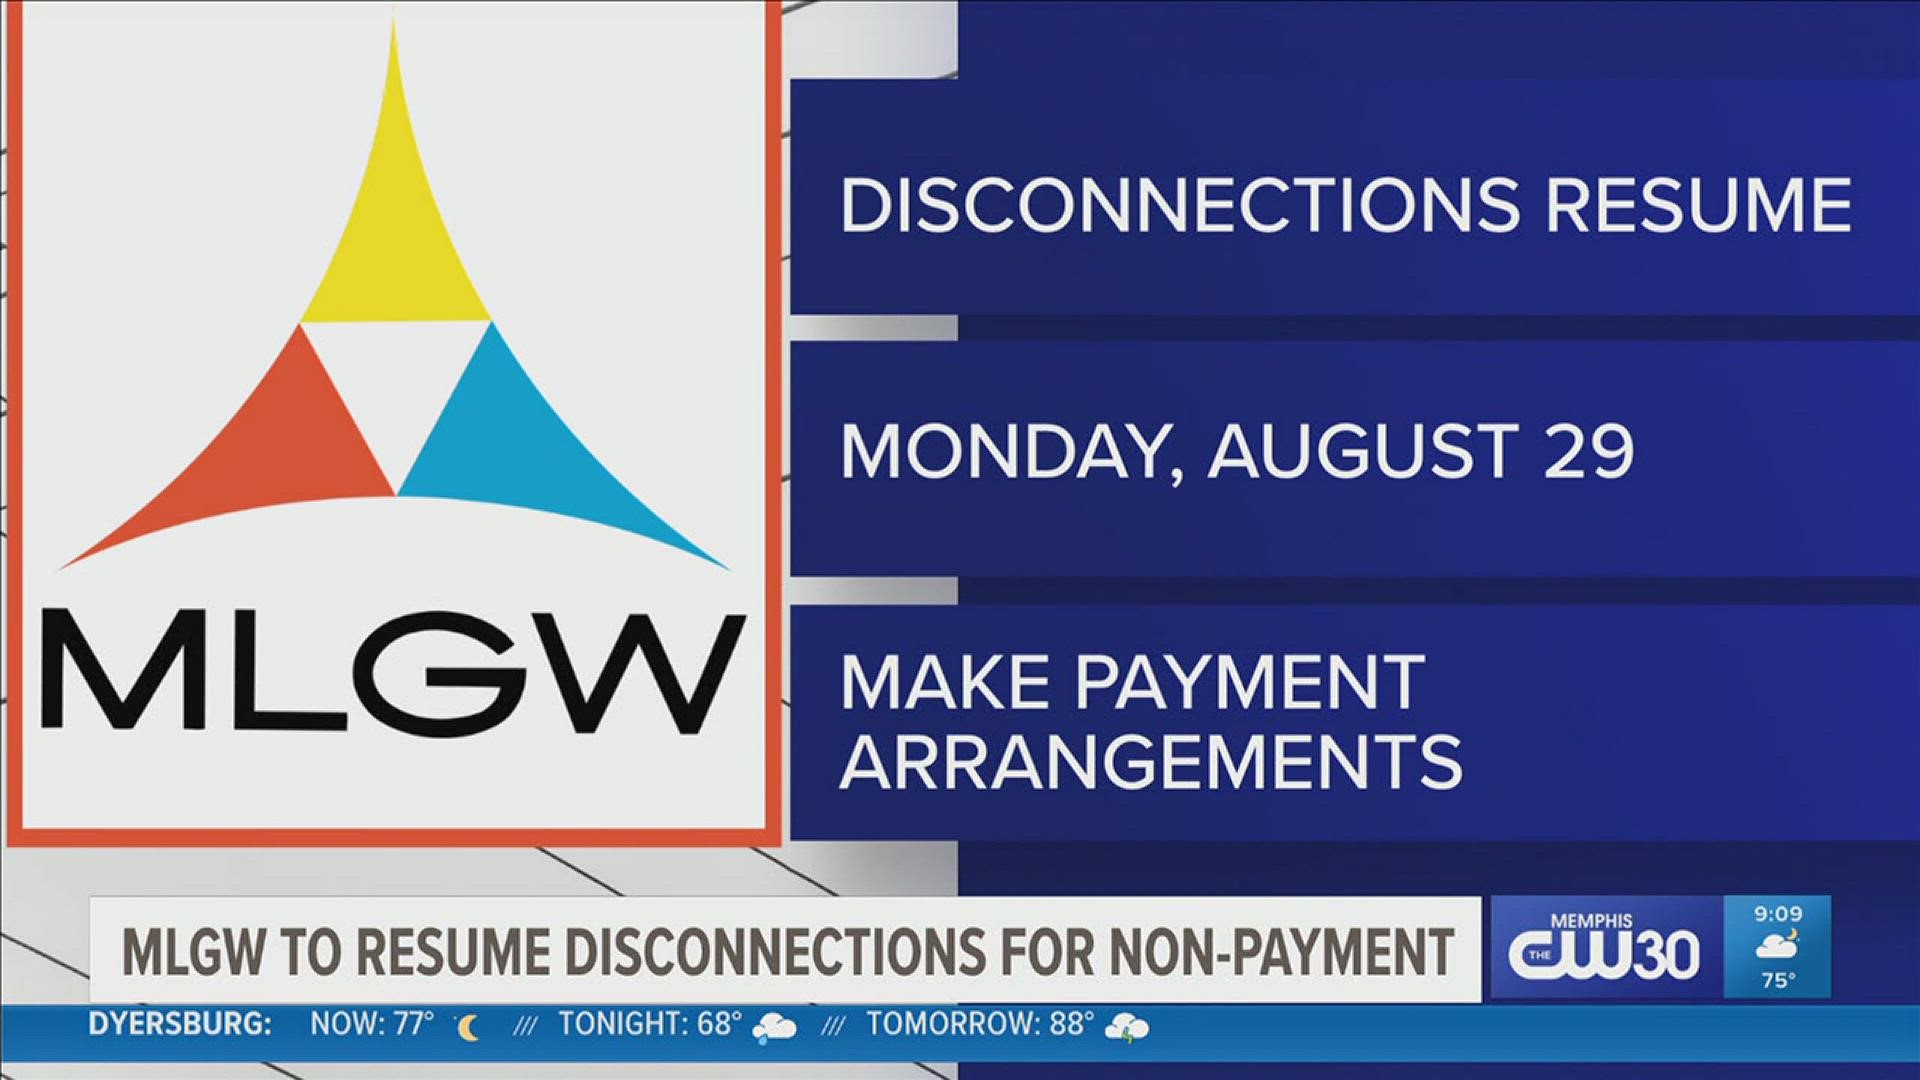 In addition to its existing assistance programs, MLGW is making its Deferred Payment Plan available online for qualifying customers.